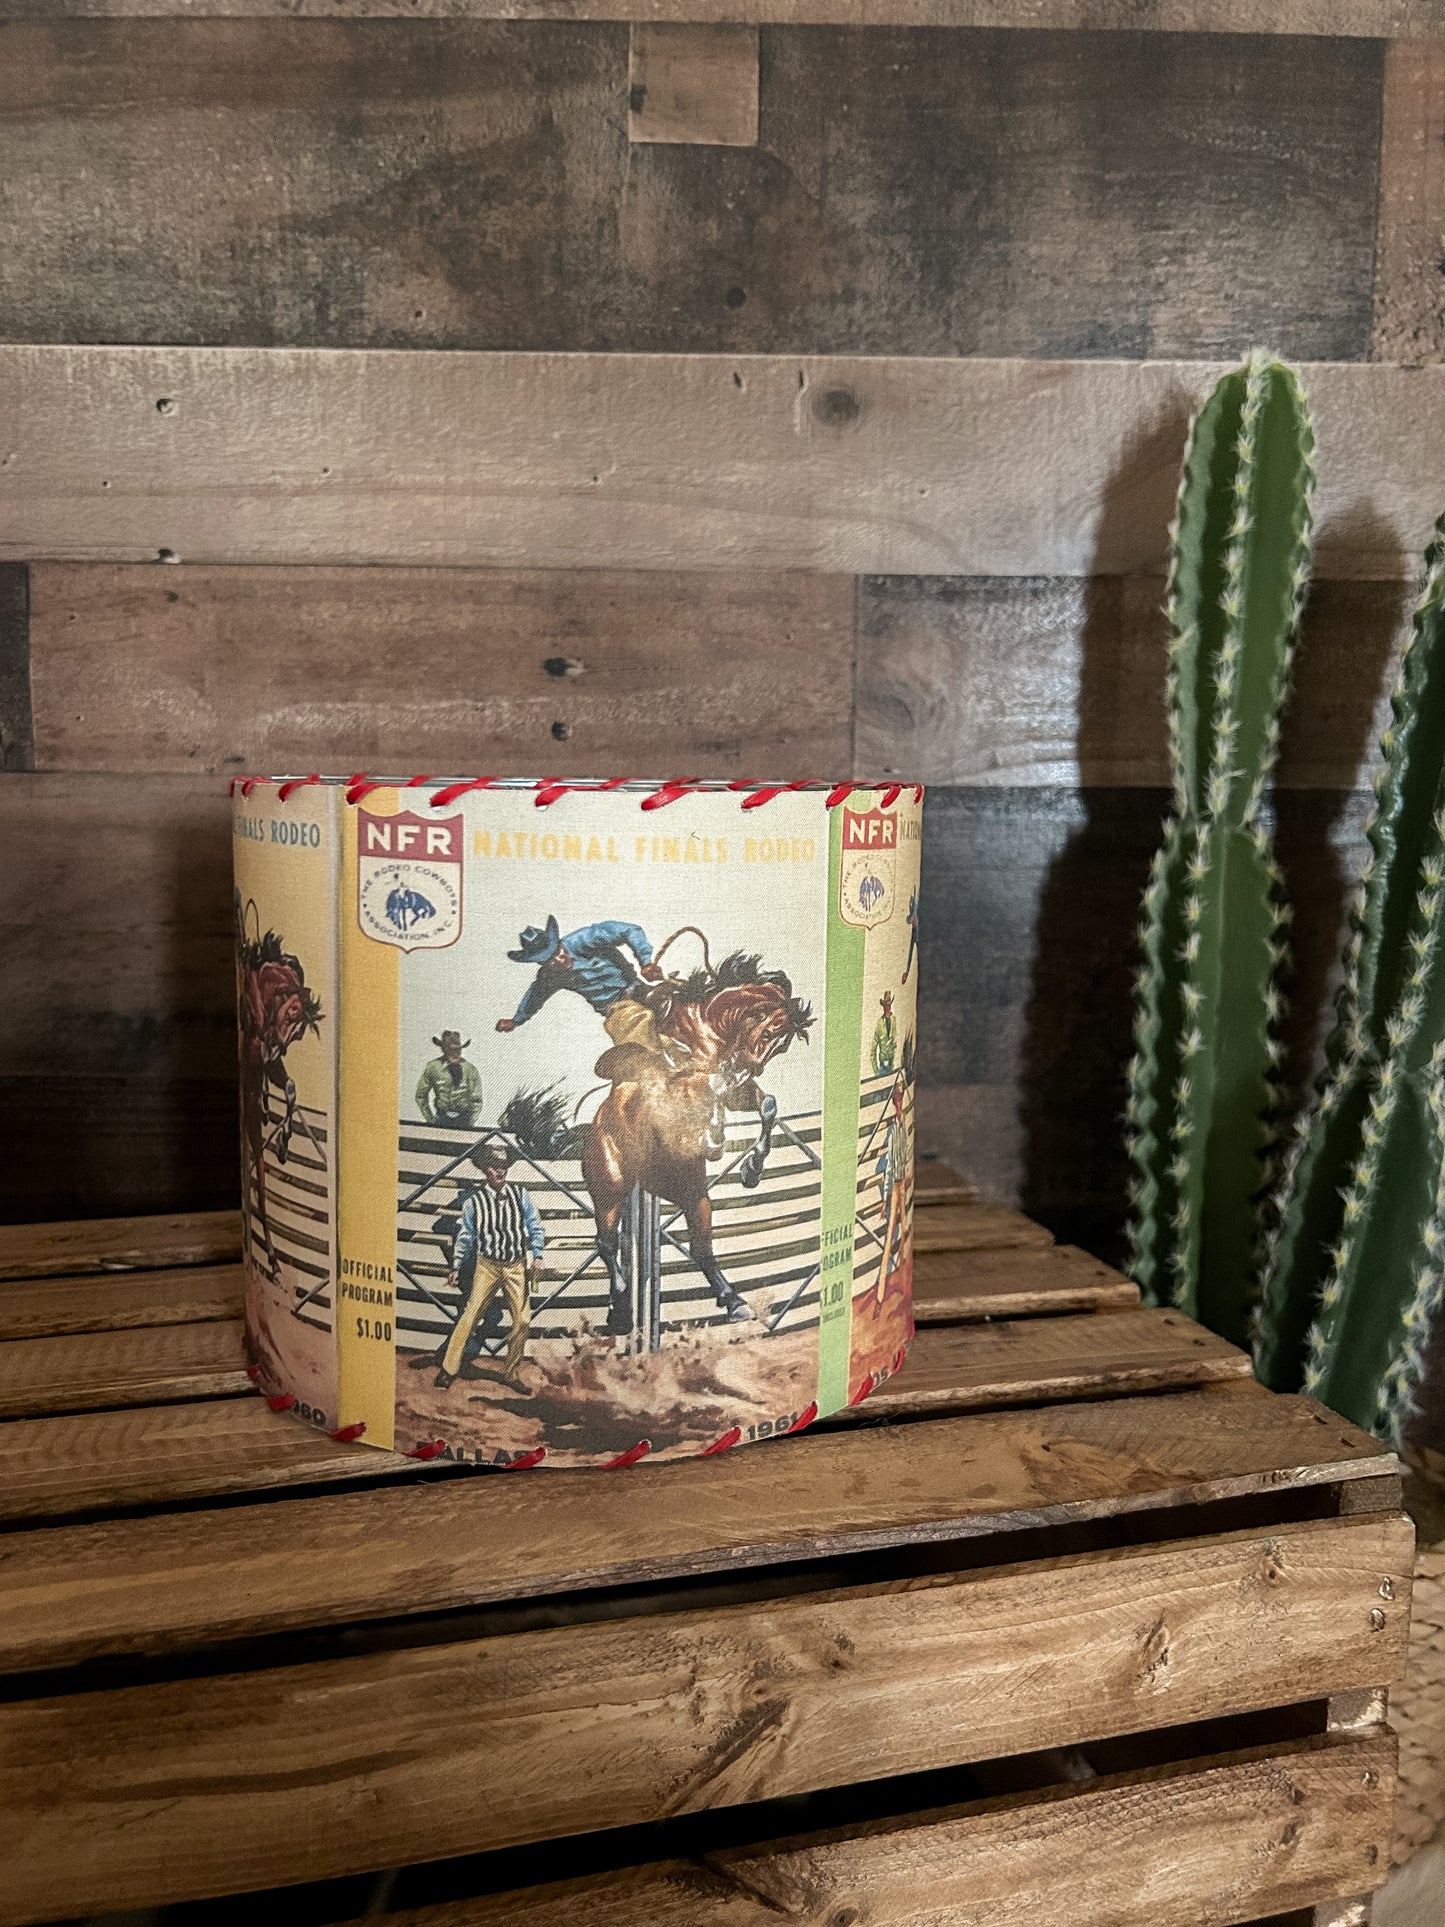 The Vintage NFR Lampshade